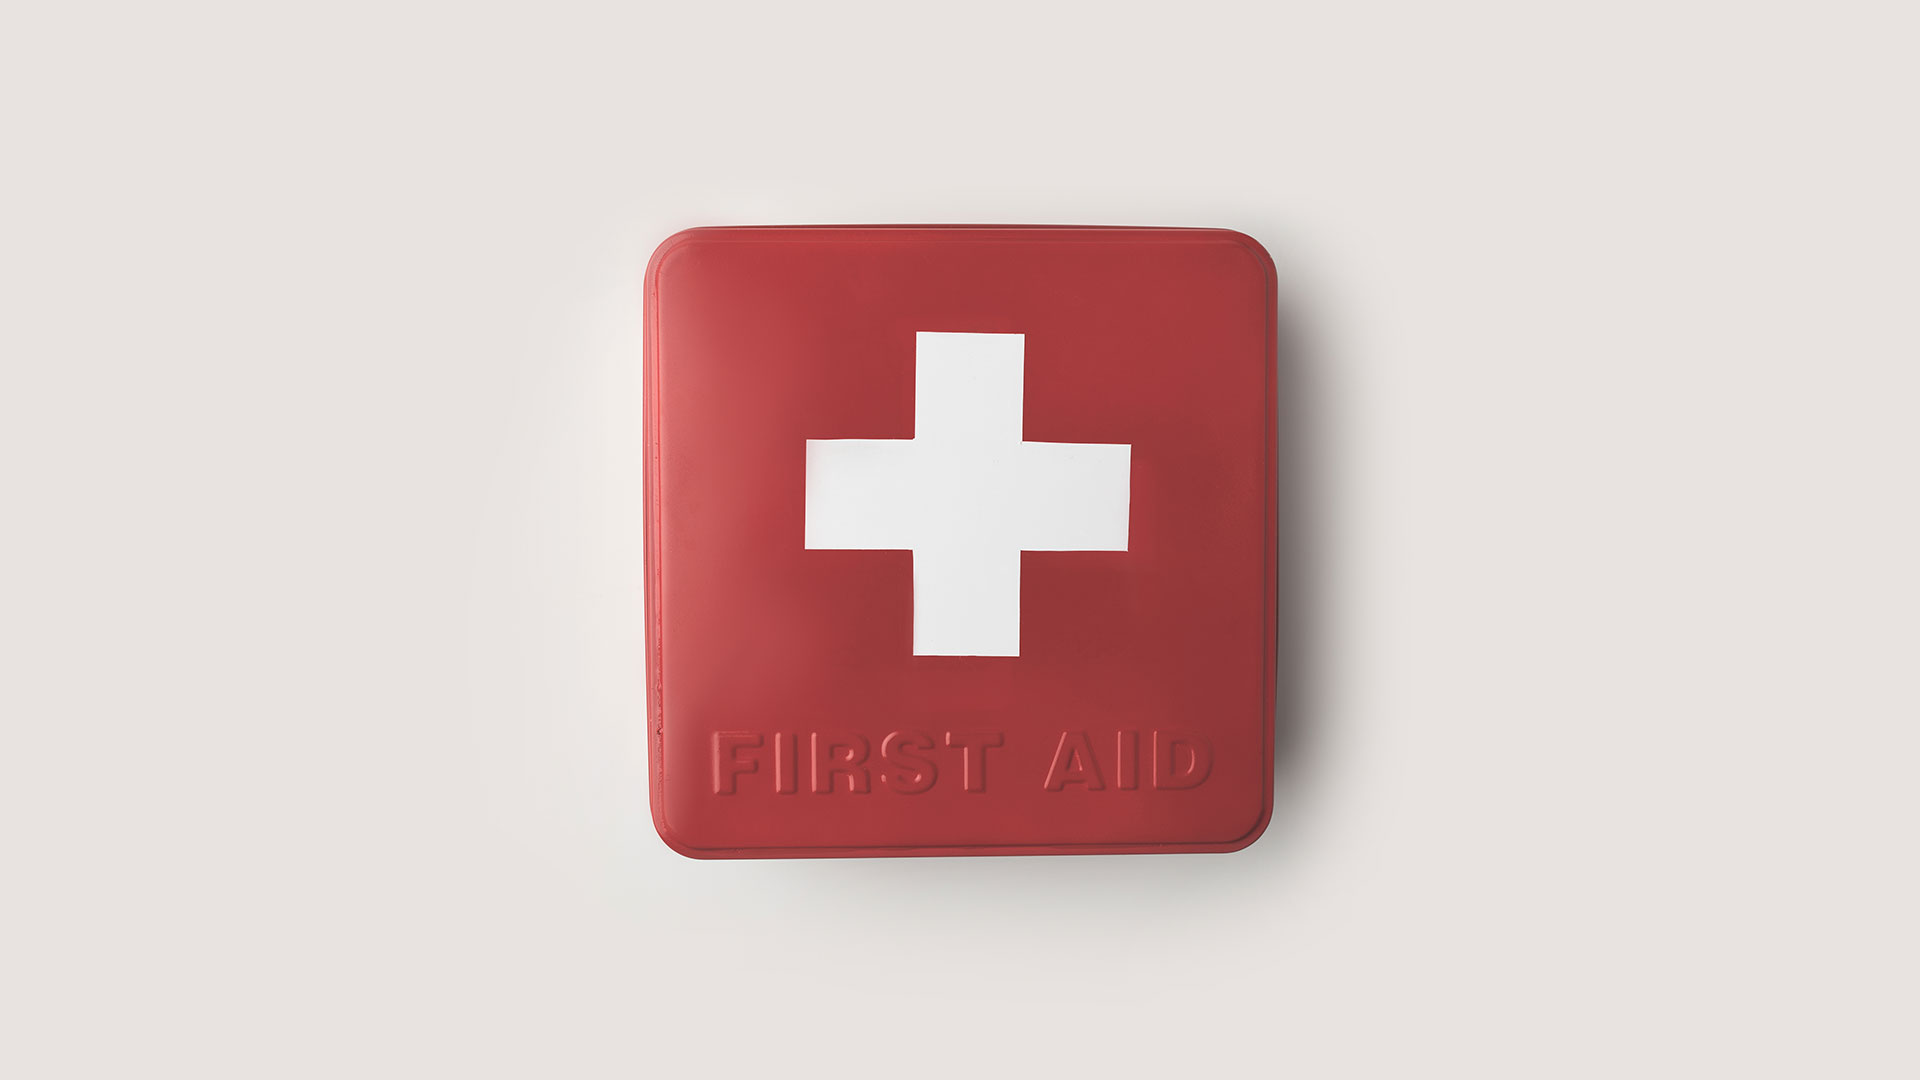 A first aid kit.